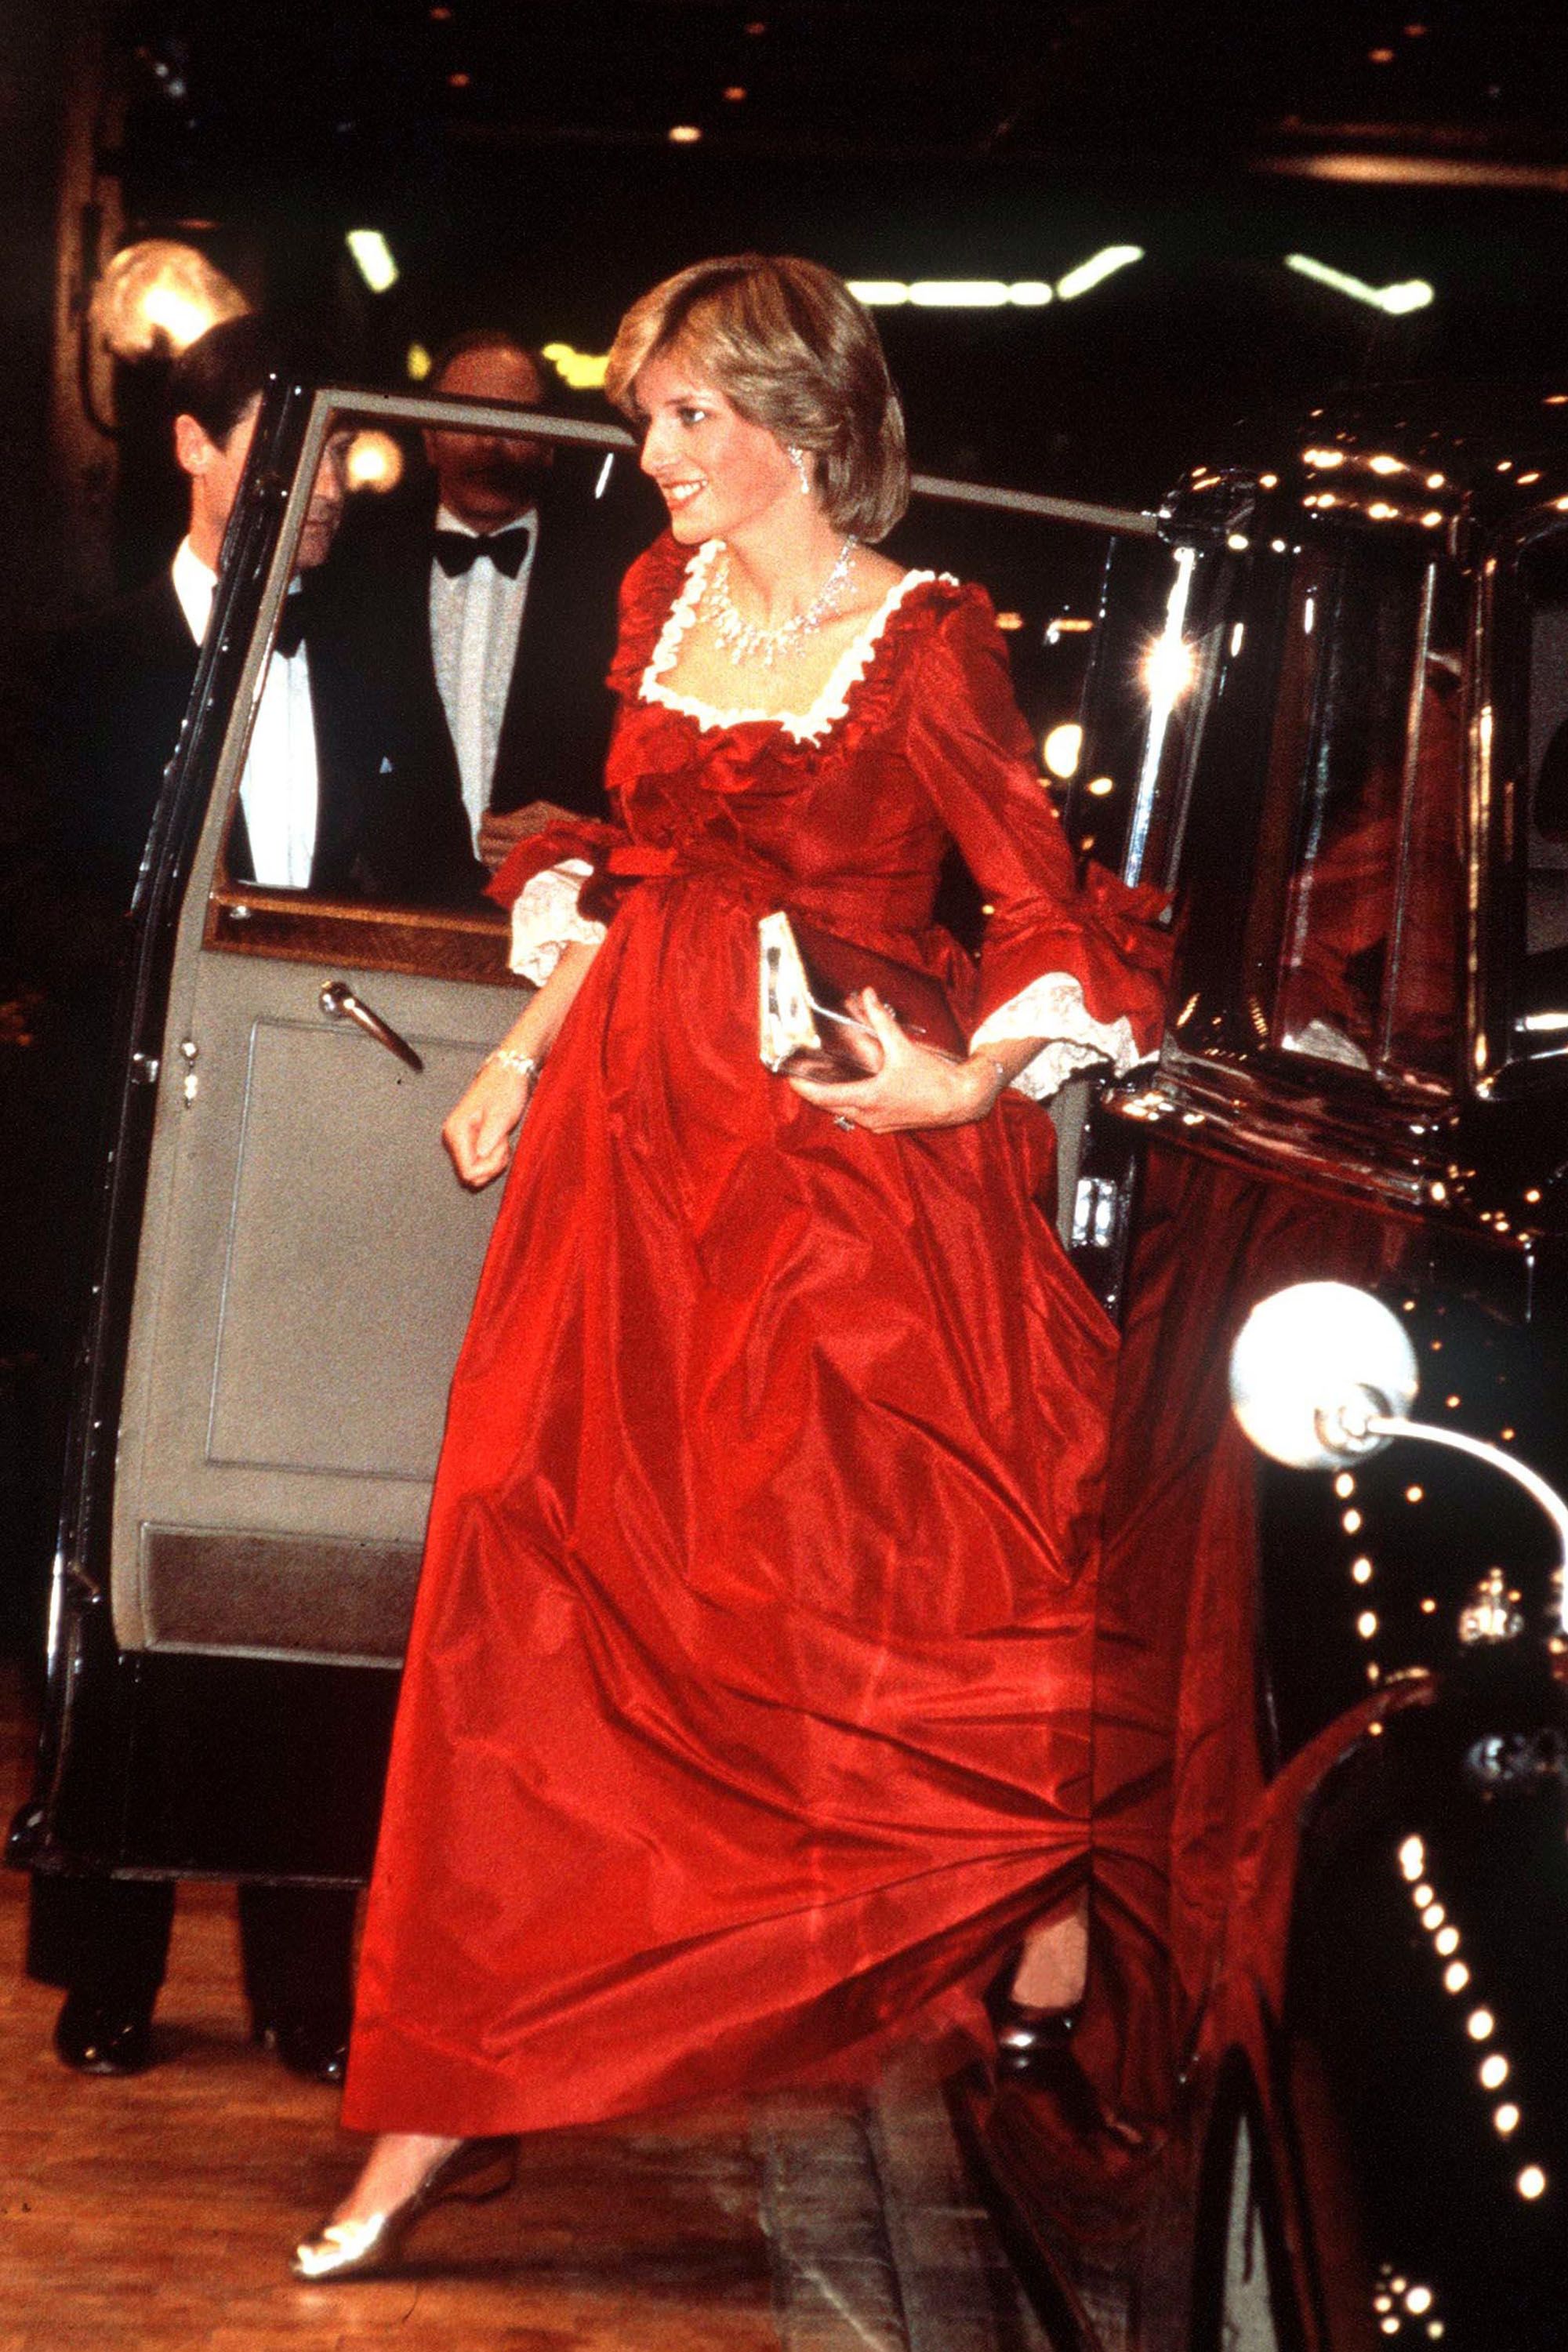 Princess Diana ball gown is sold for $167,000 at London auction